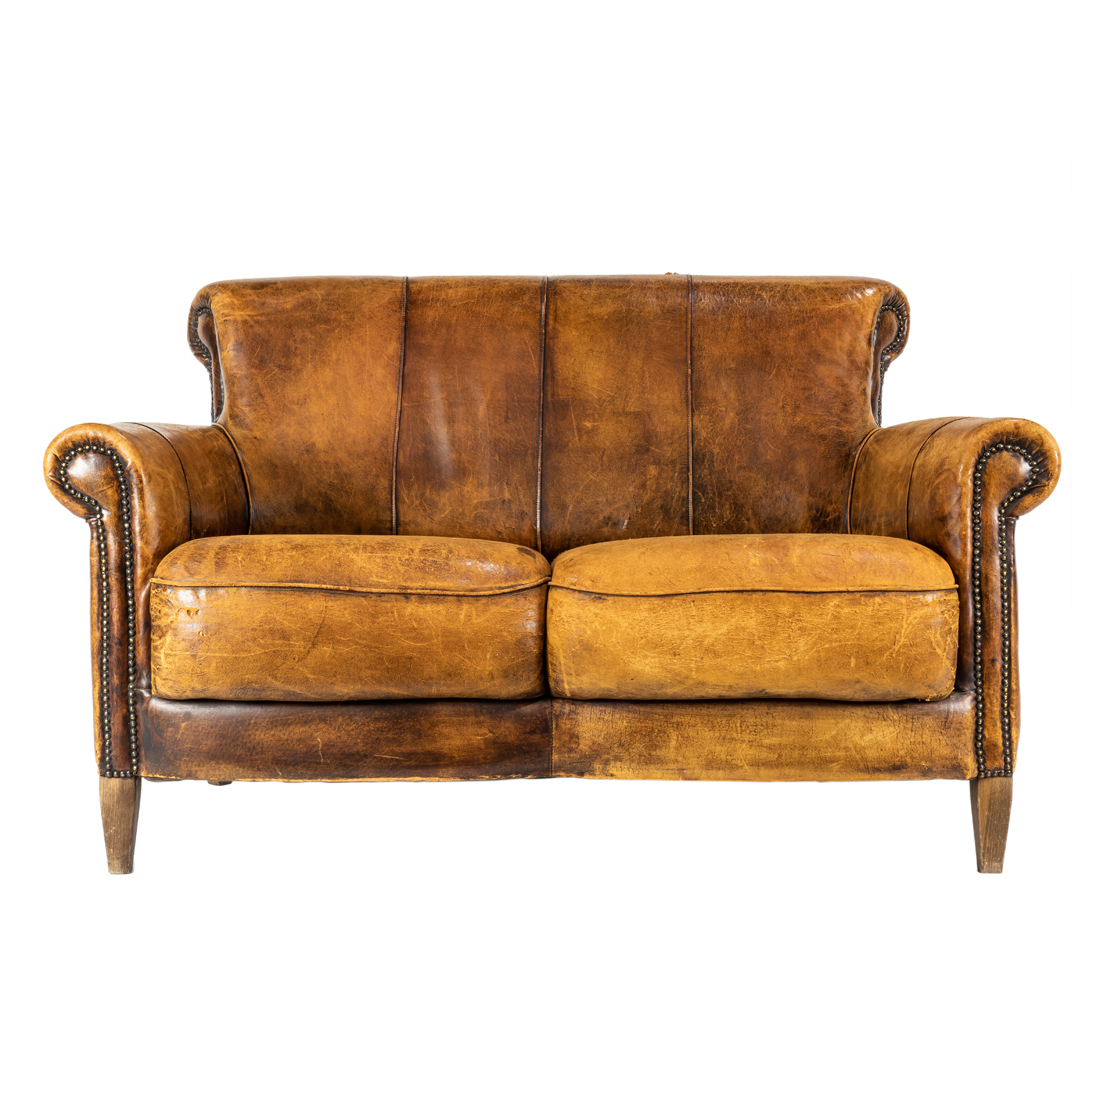 AN ART DECO LEATHER TWO SEAT SOFA 2d30b3